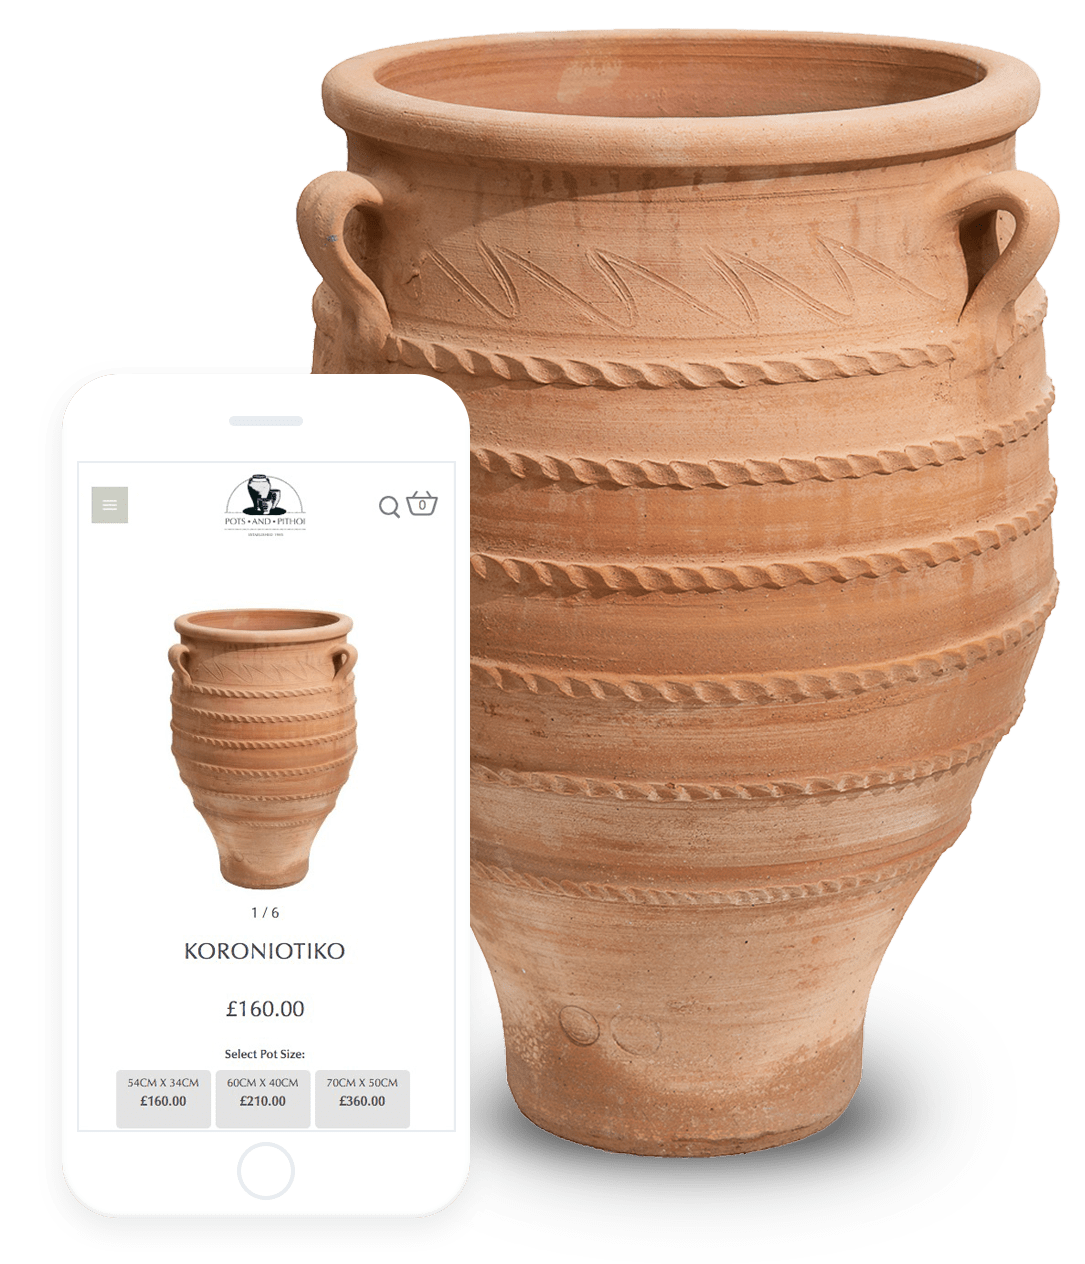 Pots and Pithoi vase and product page on mobile